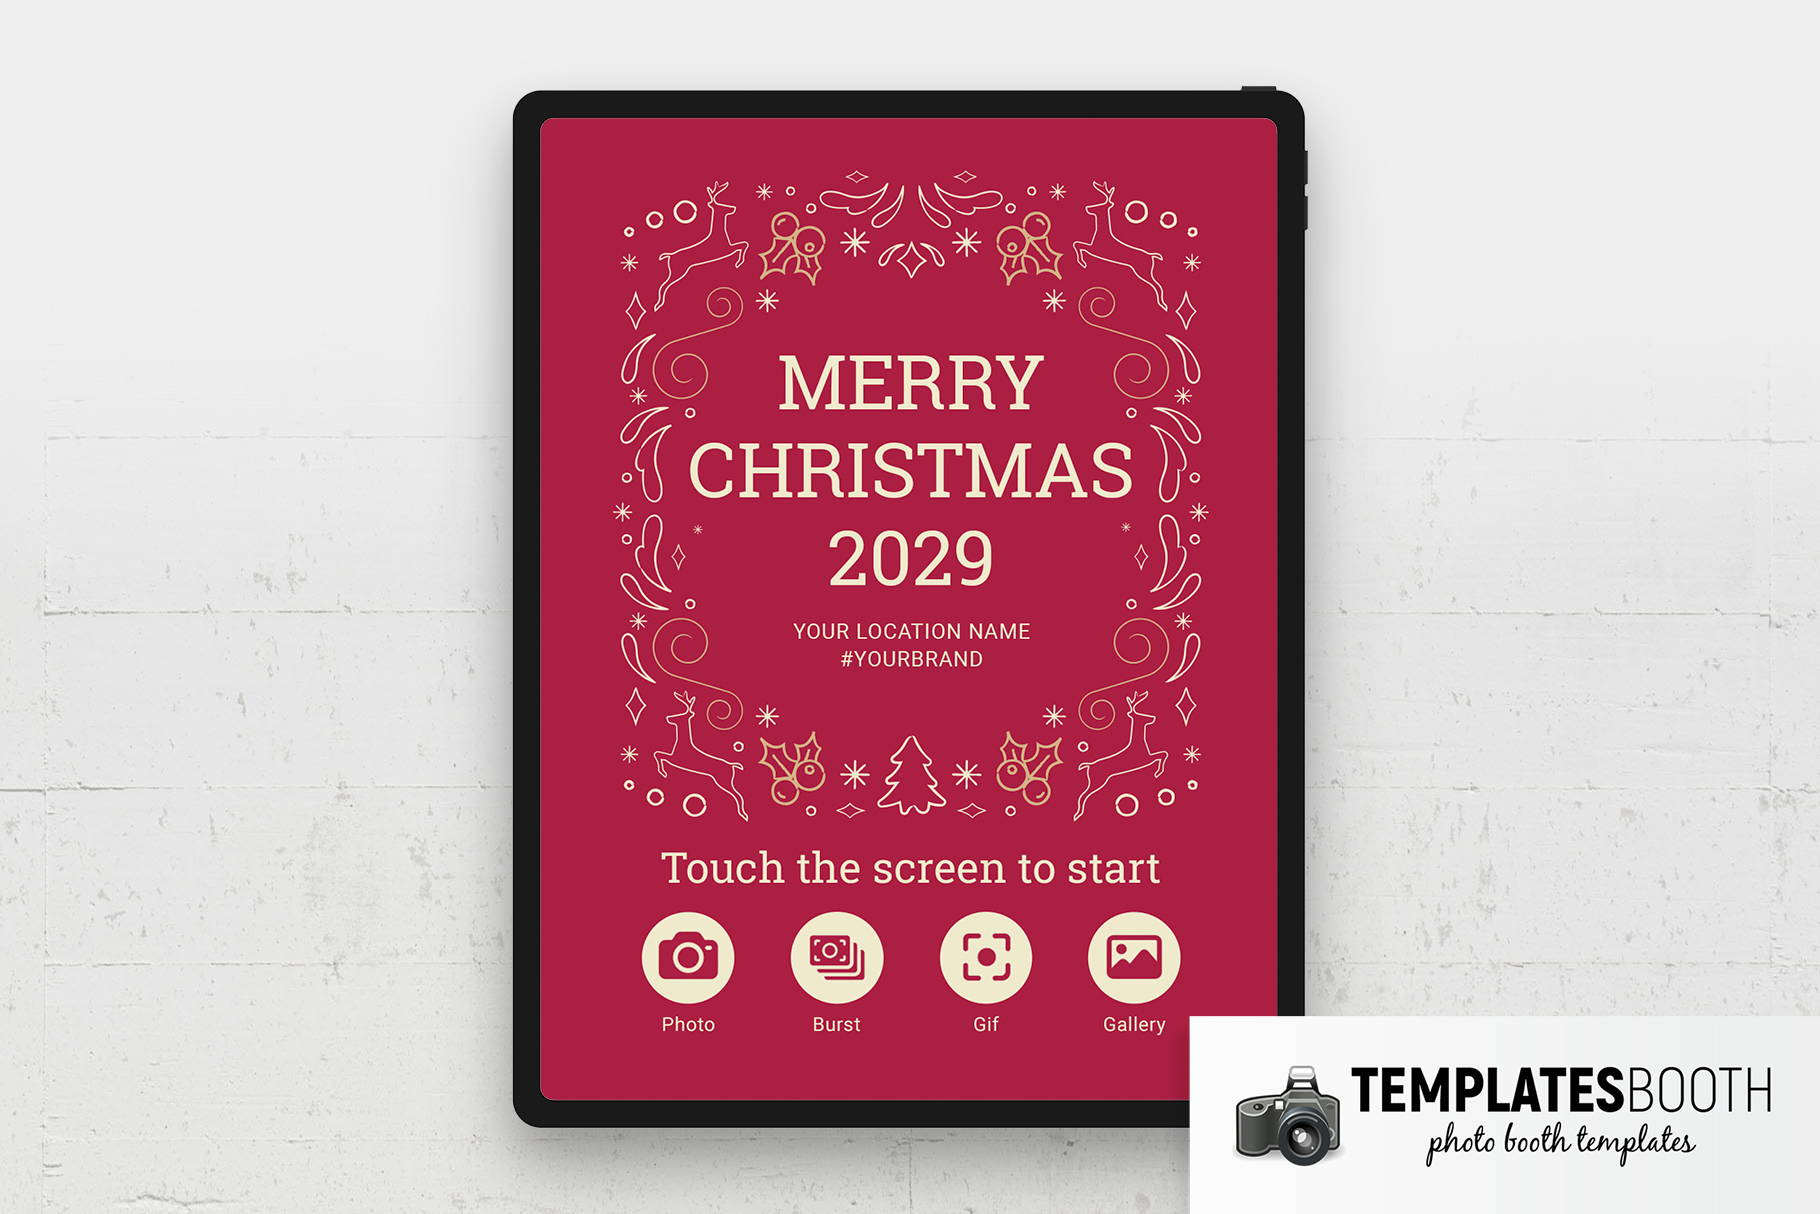 Ornate Christmas Photo Booth Welcome Screen